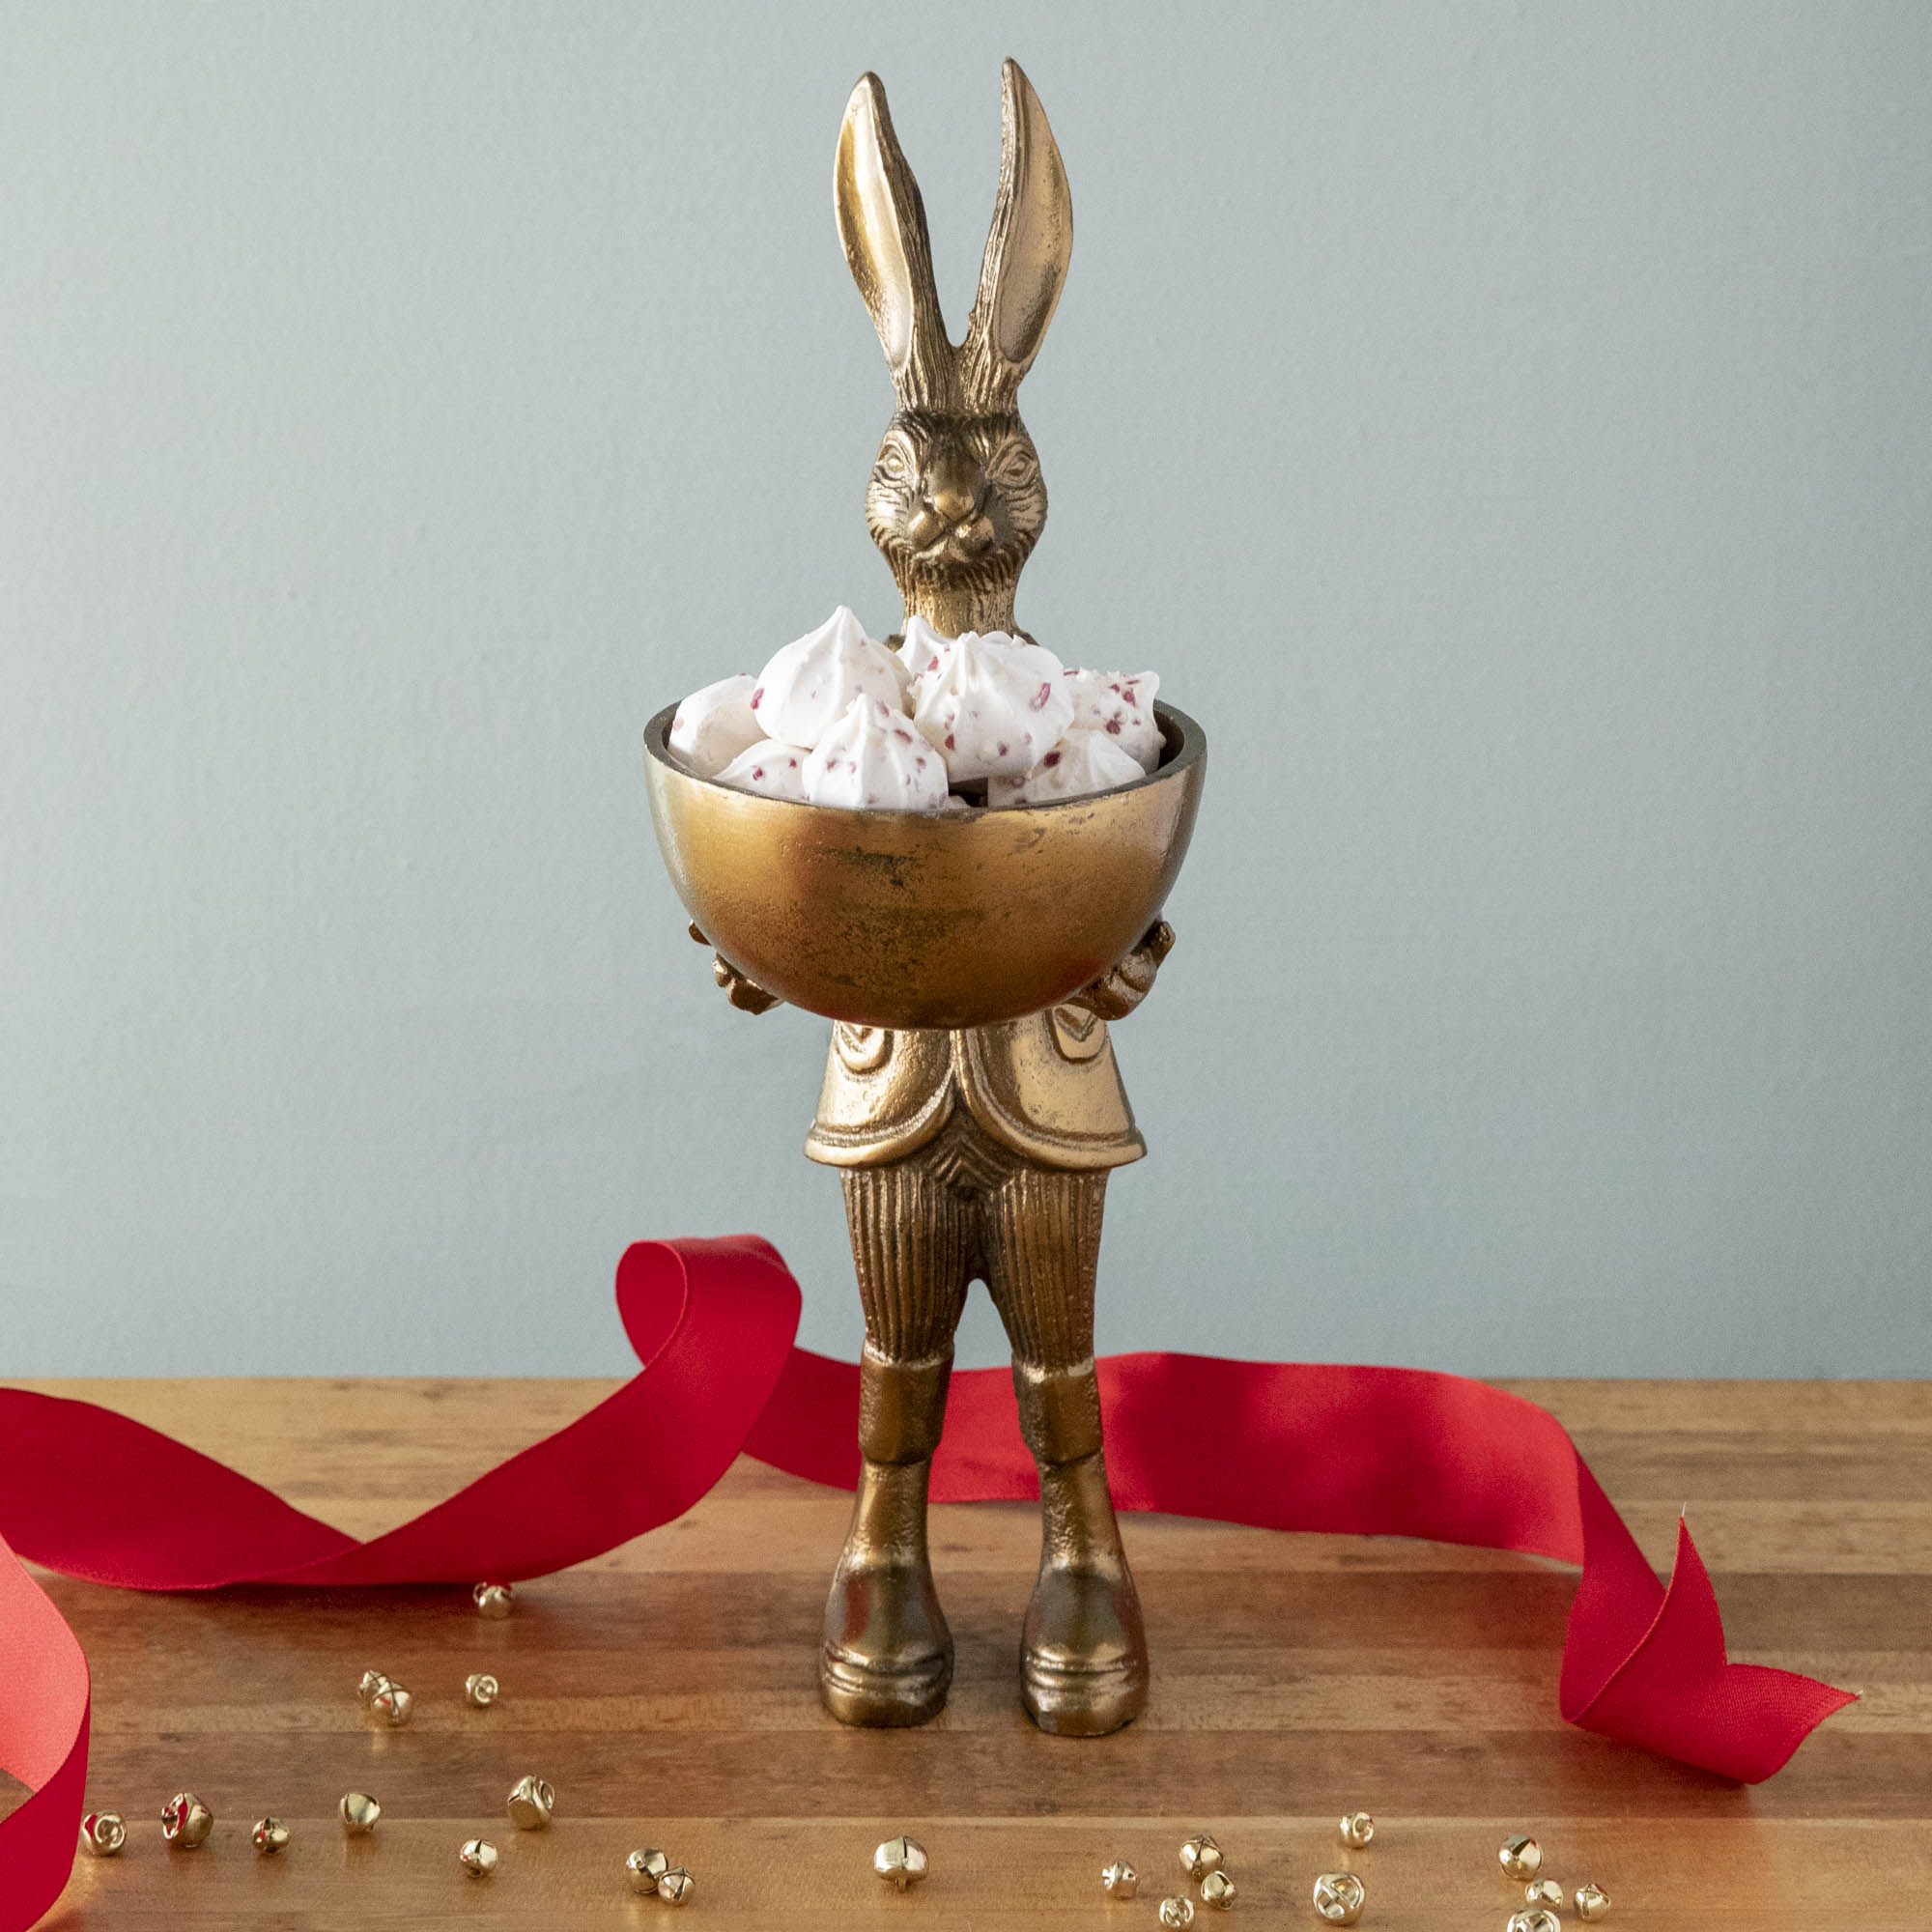 A well-dressed standing Hare Dishstand by Accent Decor holding a round dish of candy on a table.